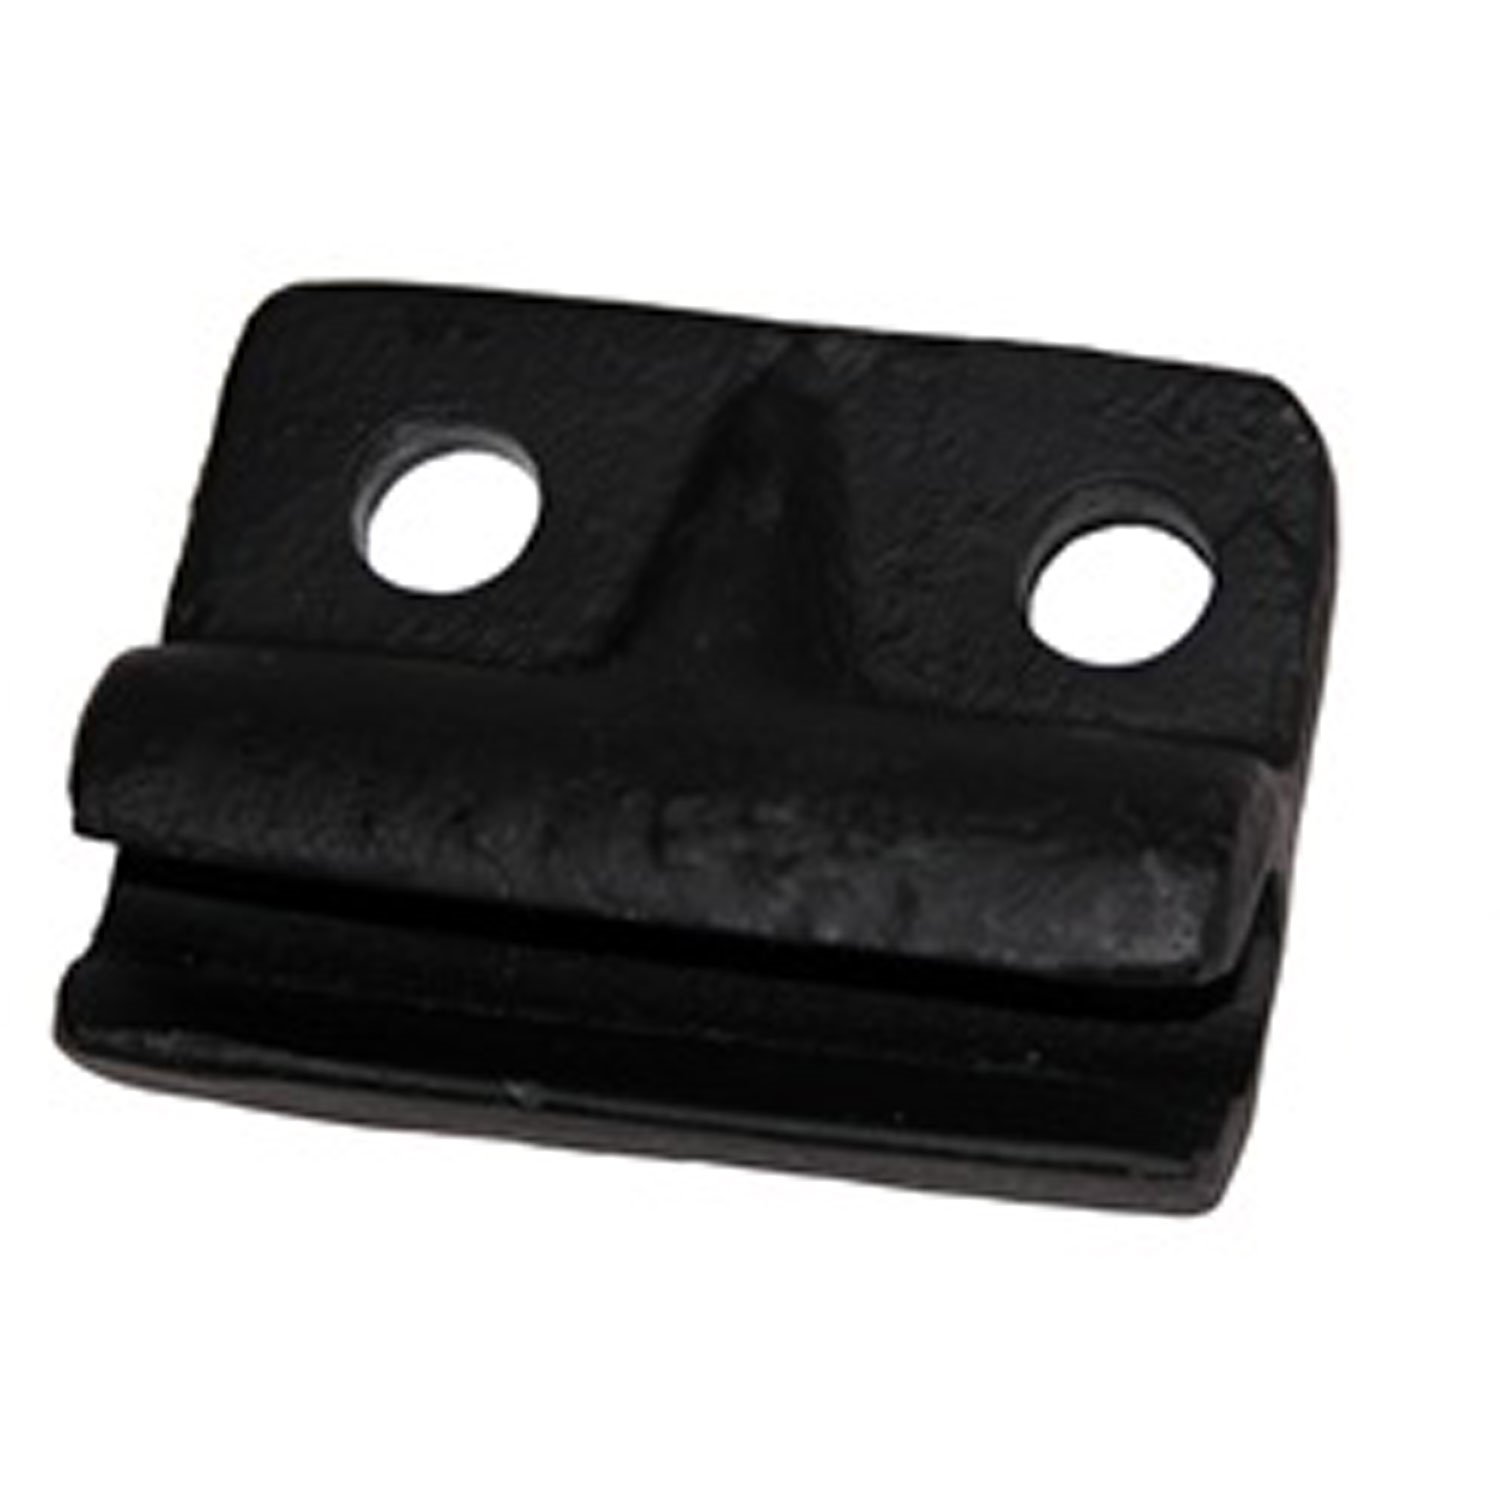 Replacement tailgate hinge from Omix-ADA, Fits 76-83 Jeep CJ5., Fits left or right side... .